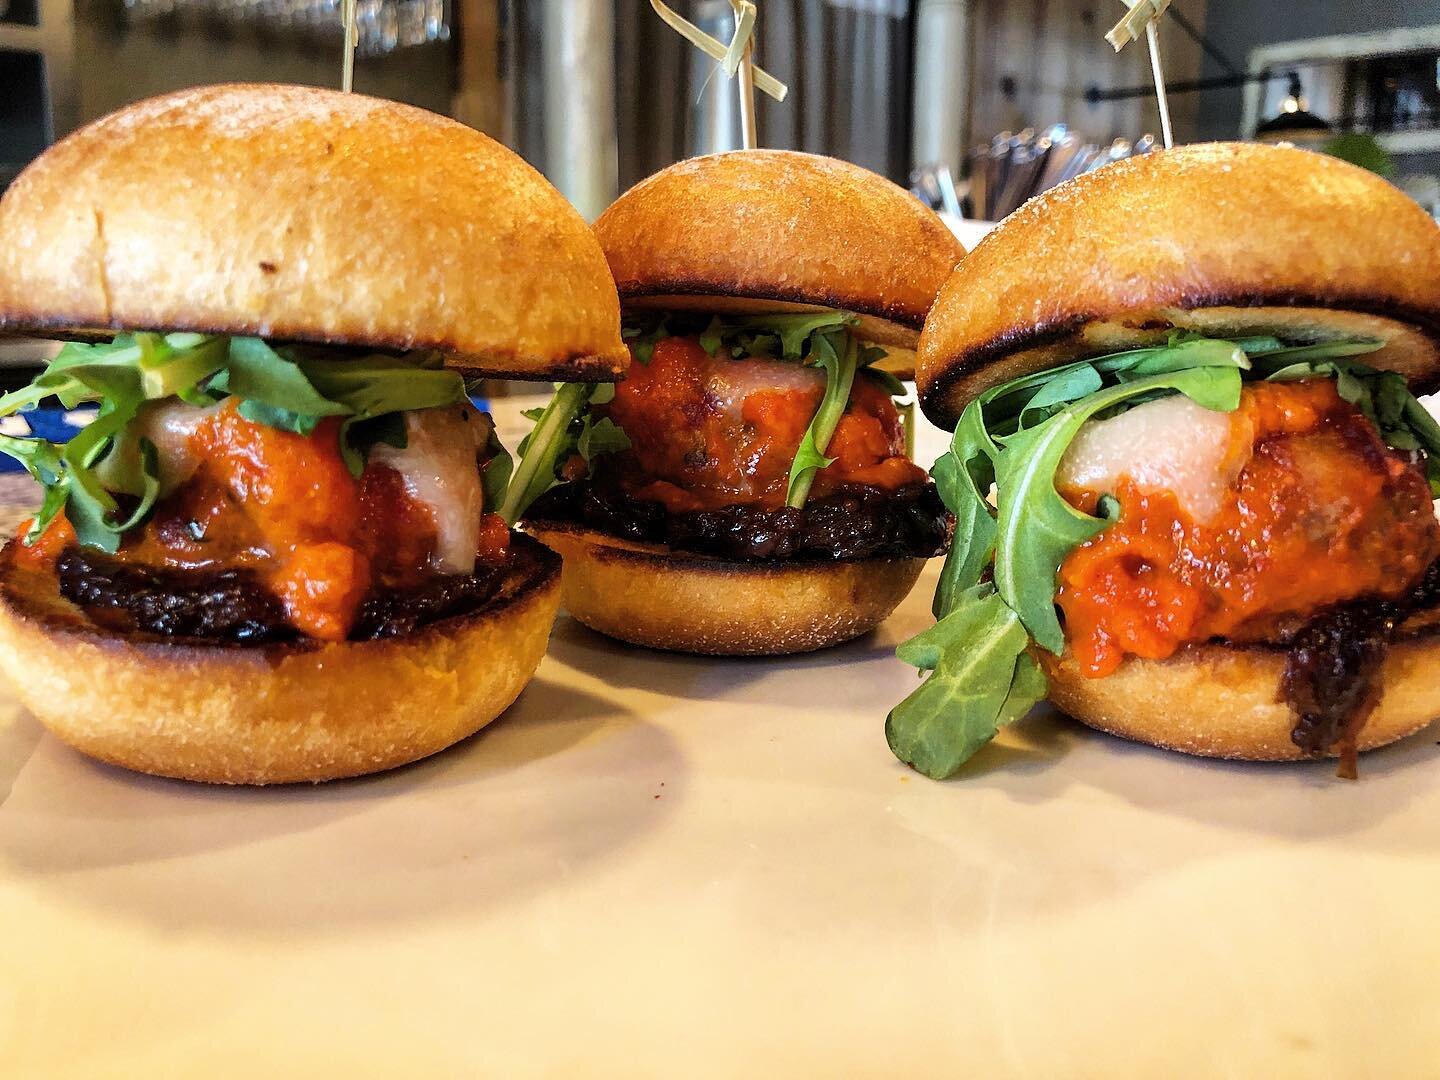 These meaty monsters are storming our bar menu tonight!
.
Spicy Meatball Sliders with balsamic onions, arugula, caciotta tartufo
.
#trufflecheese
#meatmeatthebar